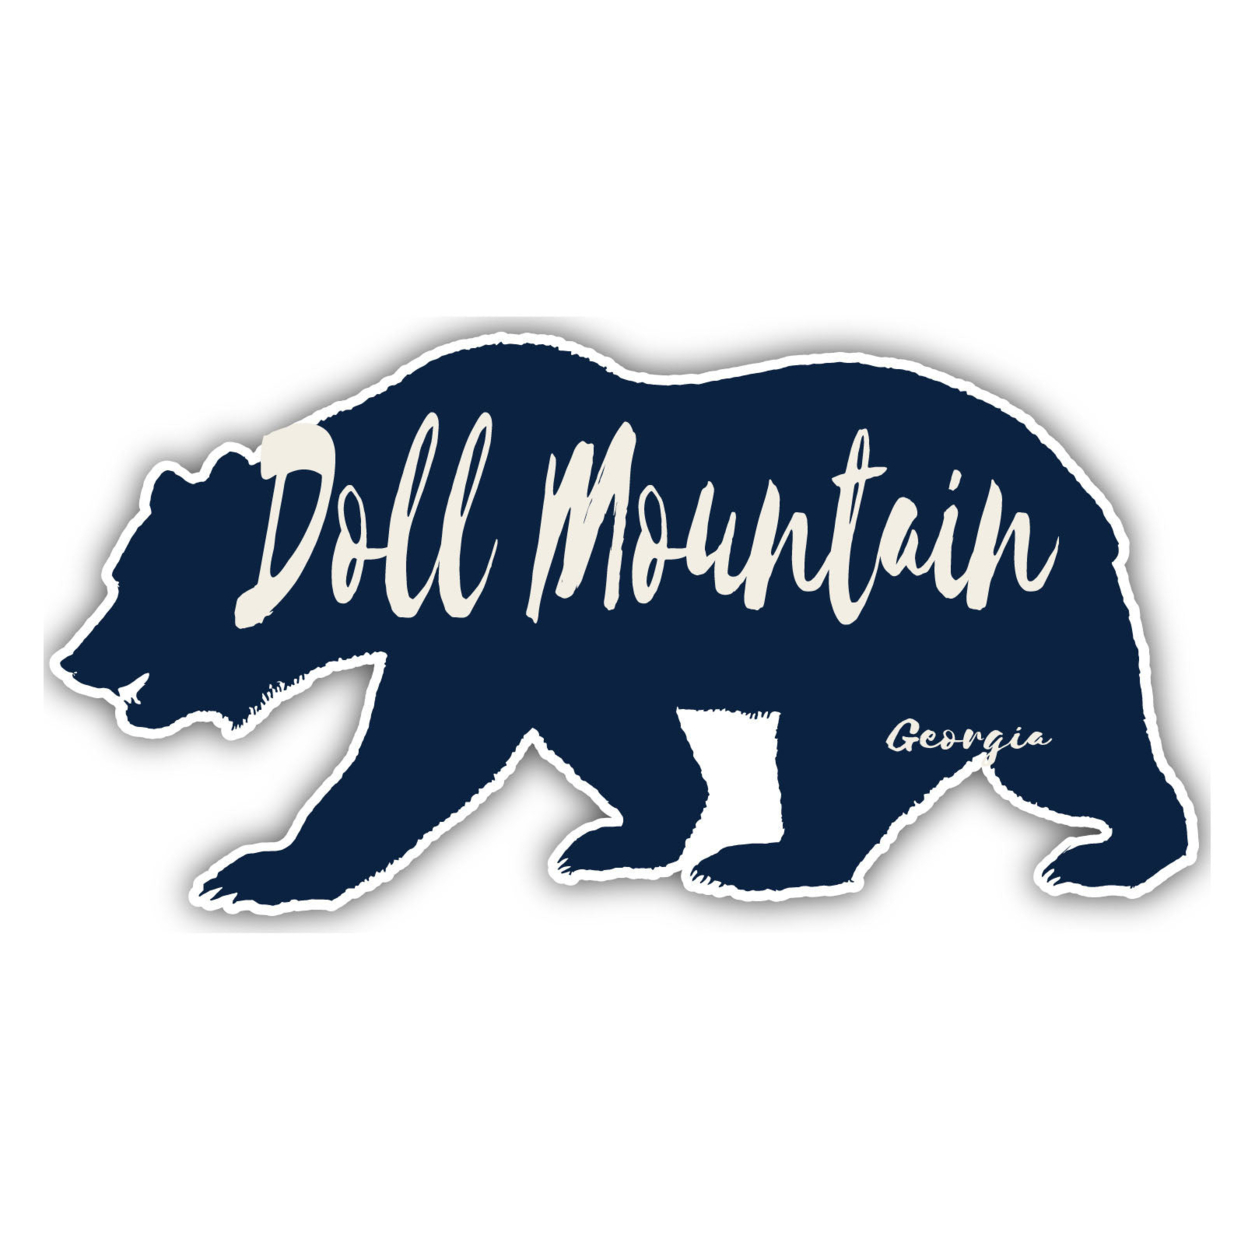 Doll Mountain Georgia Souvenir Decorative Stickers (Choose Theme And Size) - 4-Pack, 10-Inch, Bear